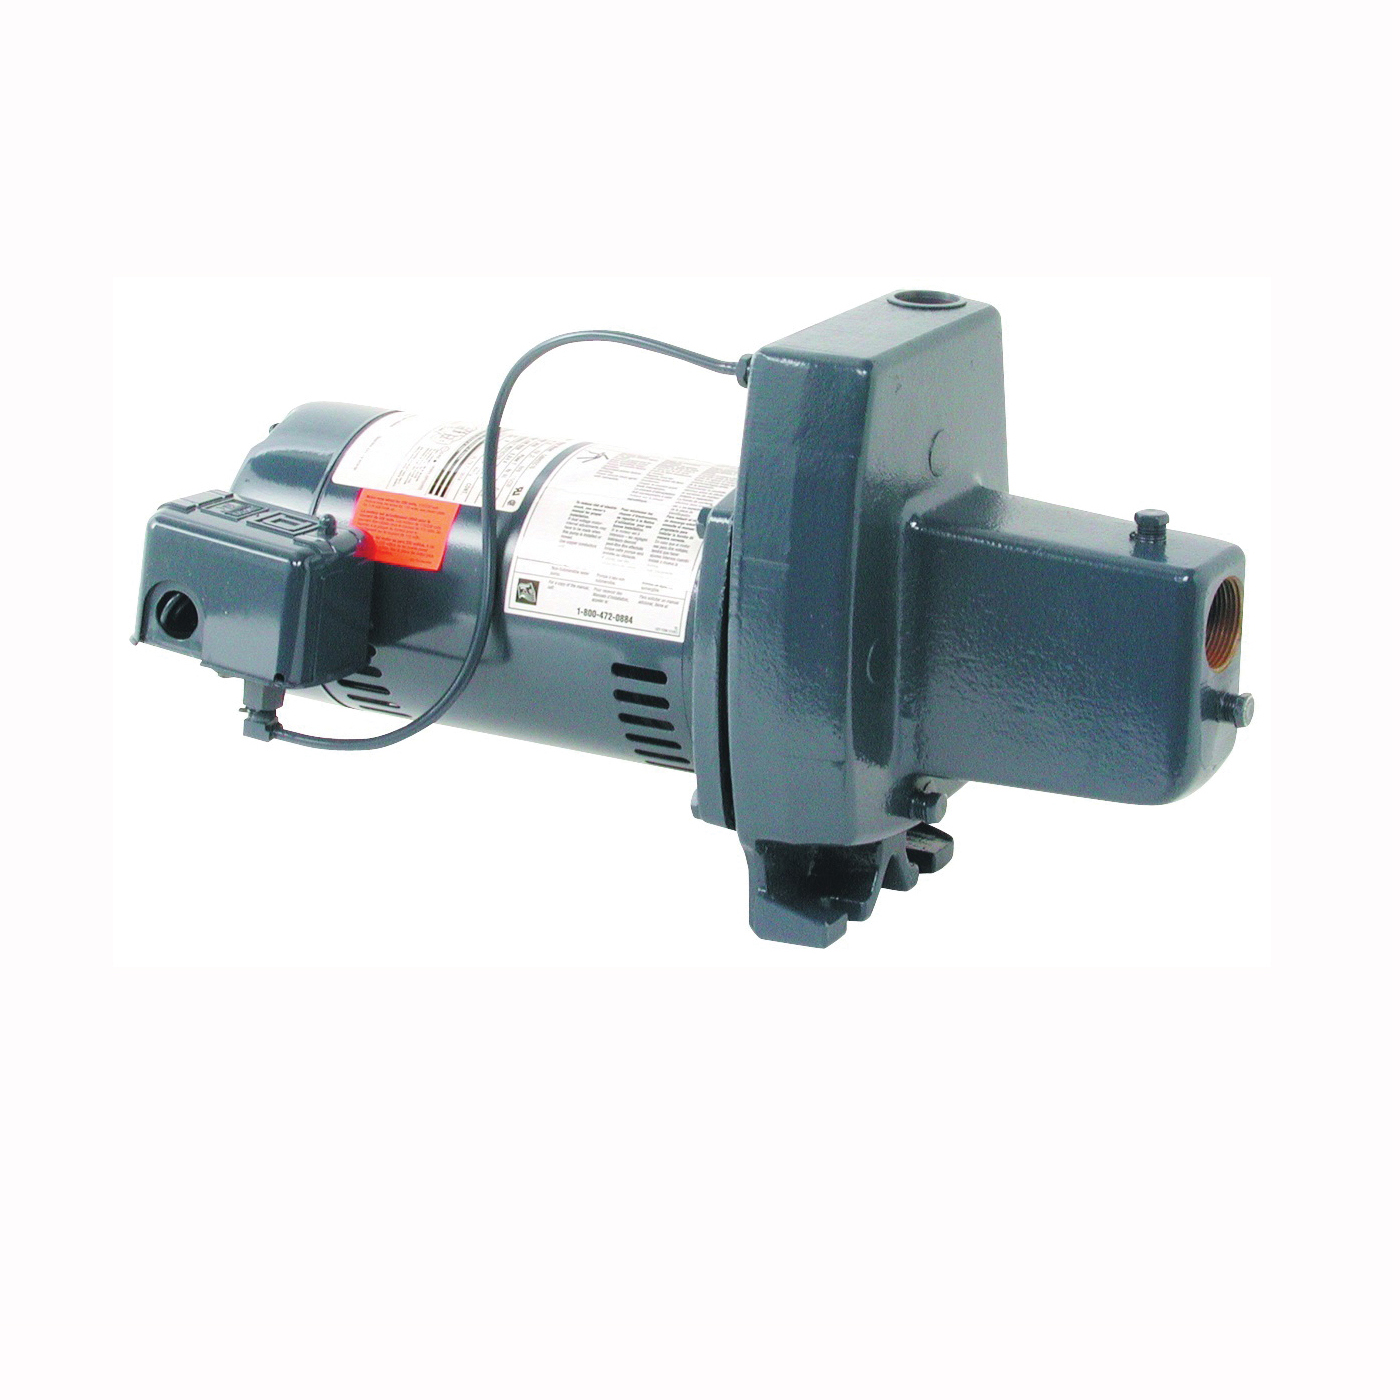 FSNCH-L Jet Pump, 9.9/4.95 A, 115/230 V, 0.5 hp, 1-1/4 in Suction, 1 in Discharge Connection, Iron